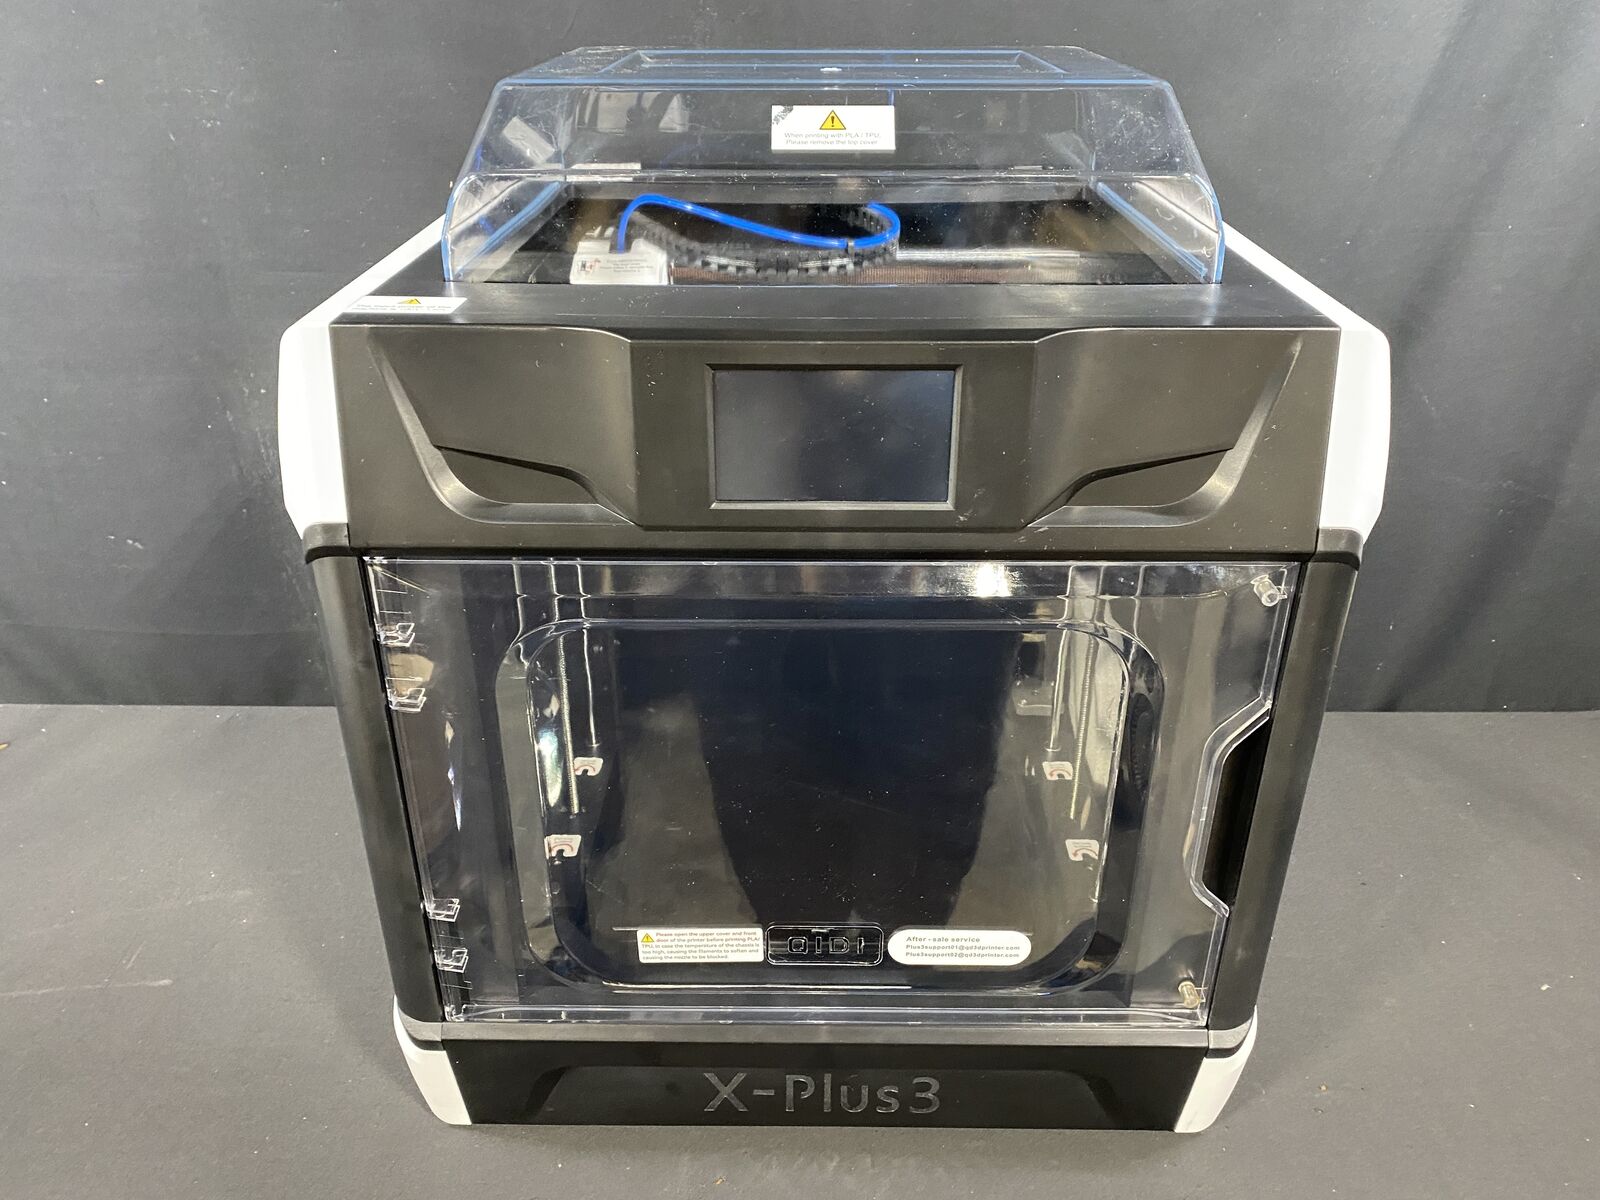 QIDI X-PLUS3 Technology 600mm/s Industrial Grade High-Speed 3D Printers Used